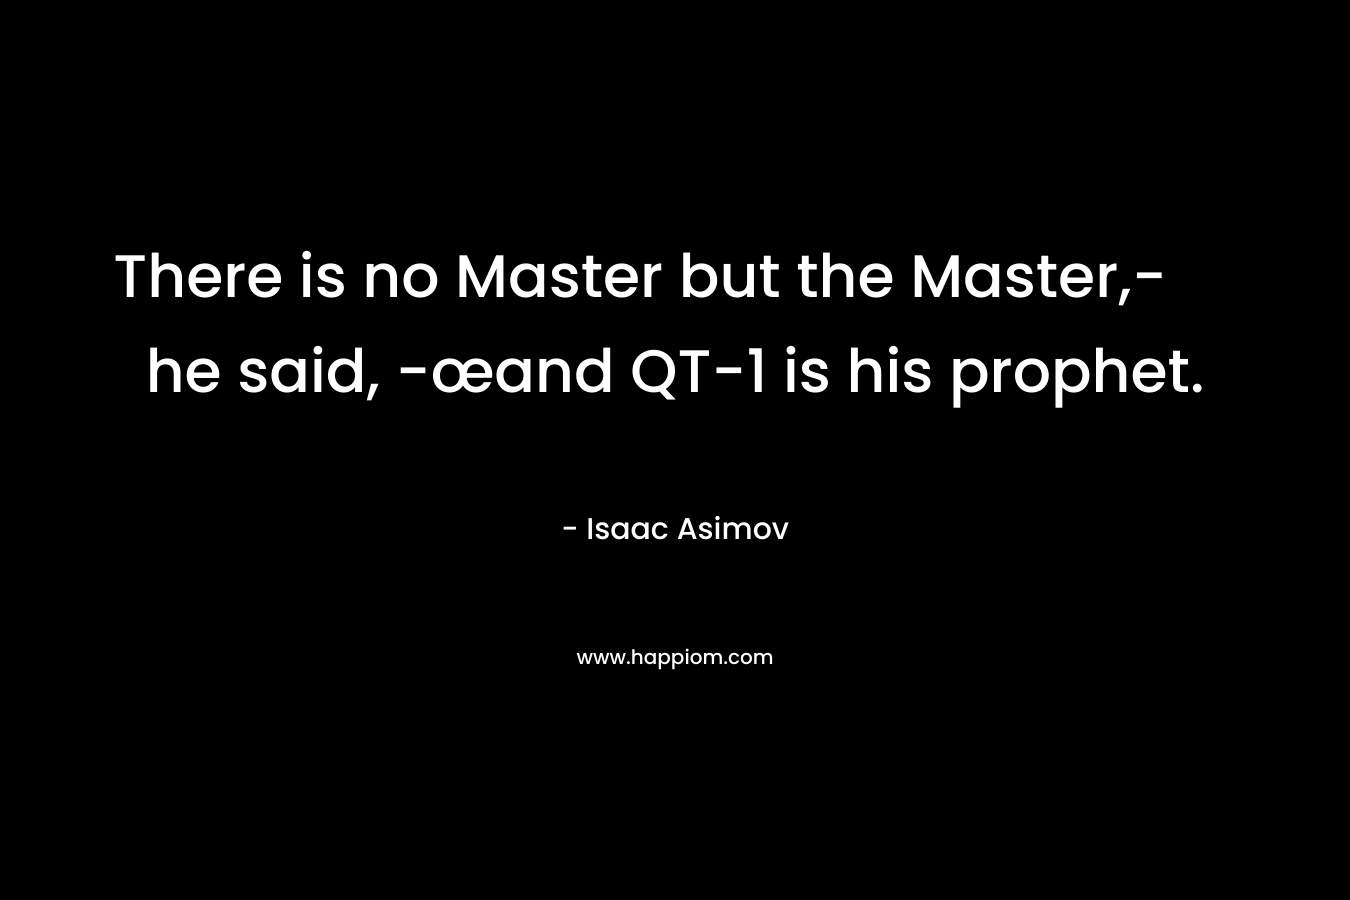 There is no Master but the Master,- he said, -œand QT-1 is his prophet. – Isaac Asimov